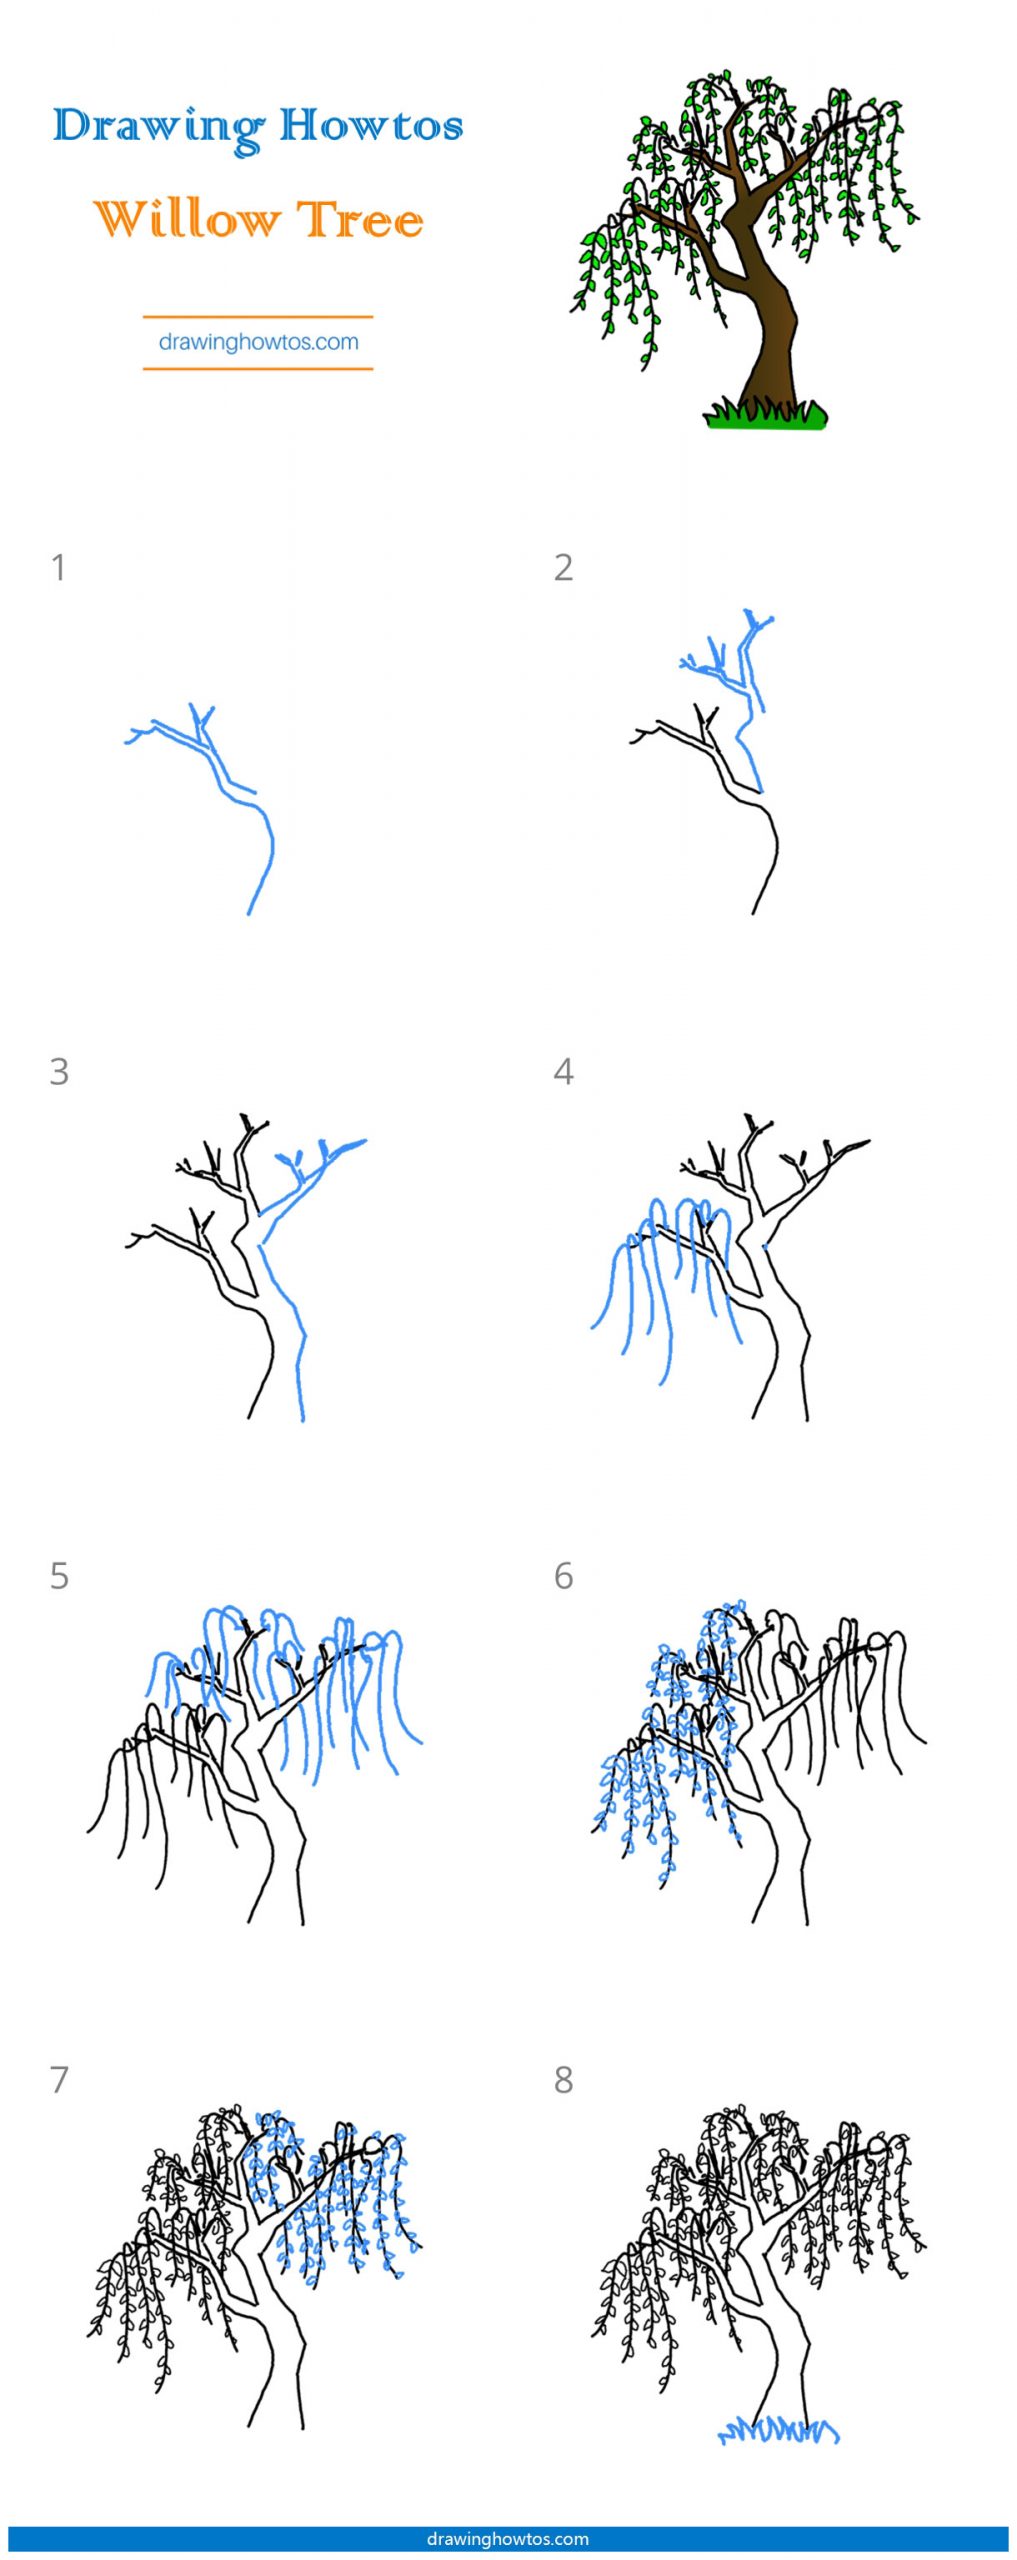 How to Draw a Willow Tree Step by Step